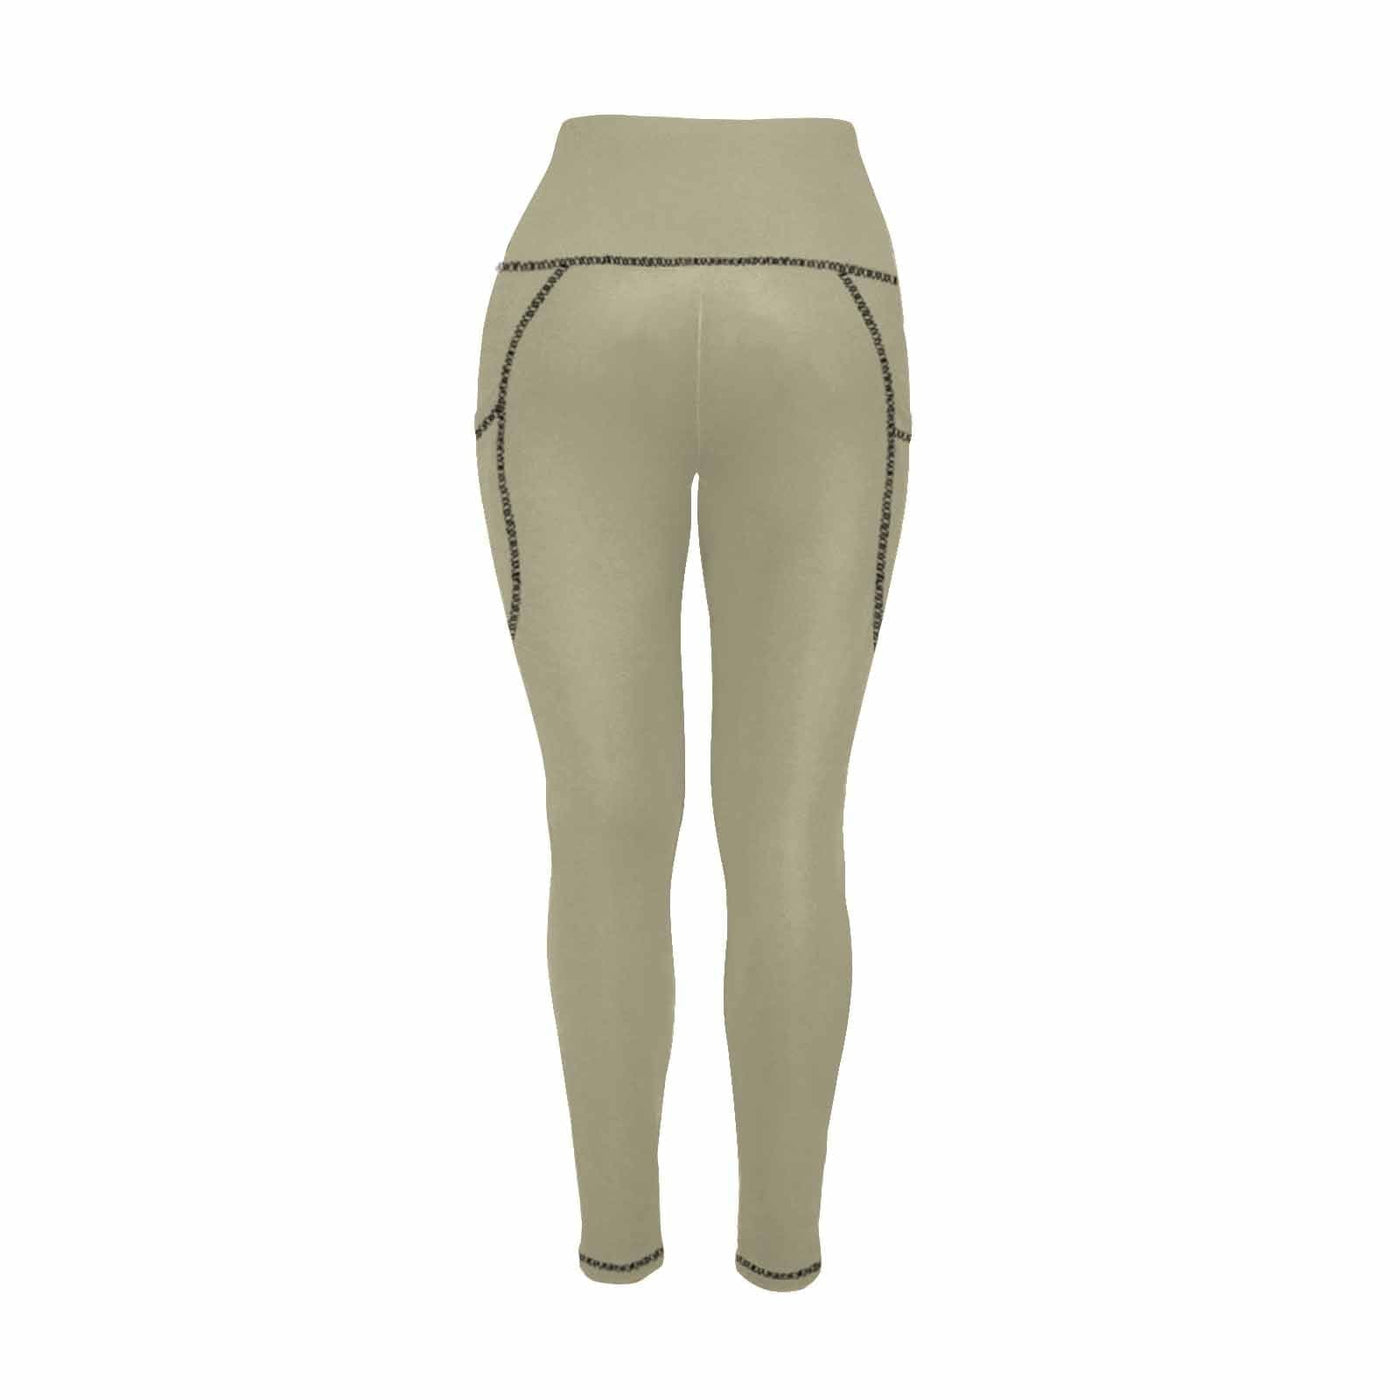 Womens Leggings With Pockets - Fitness Pants / Dark Sage Green - Womens